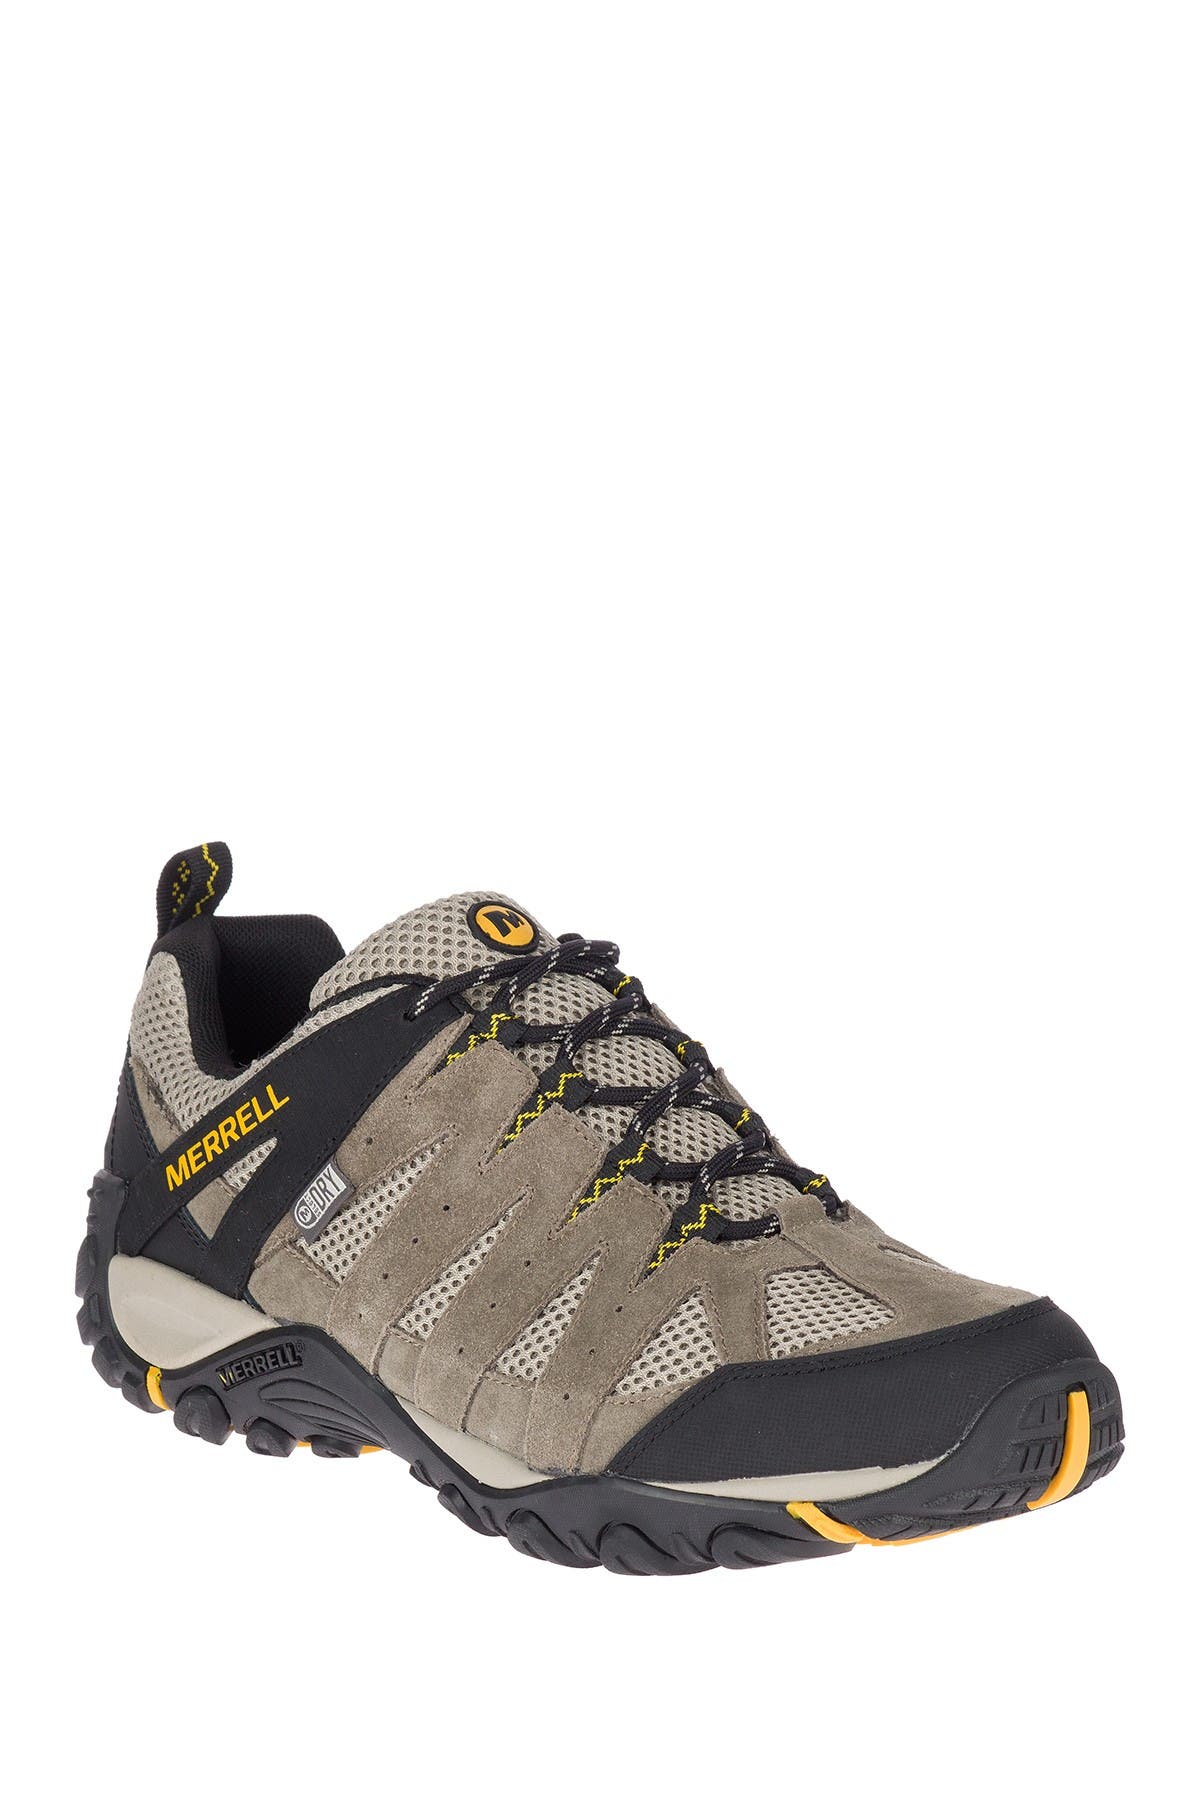 merrell accentor low hiking shoes